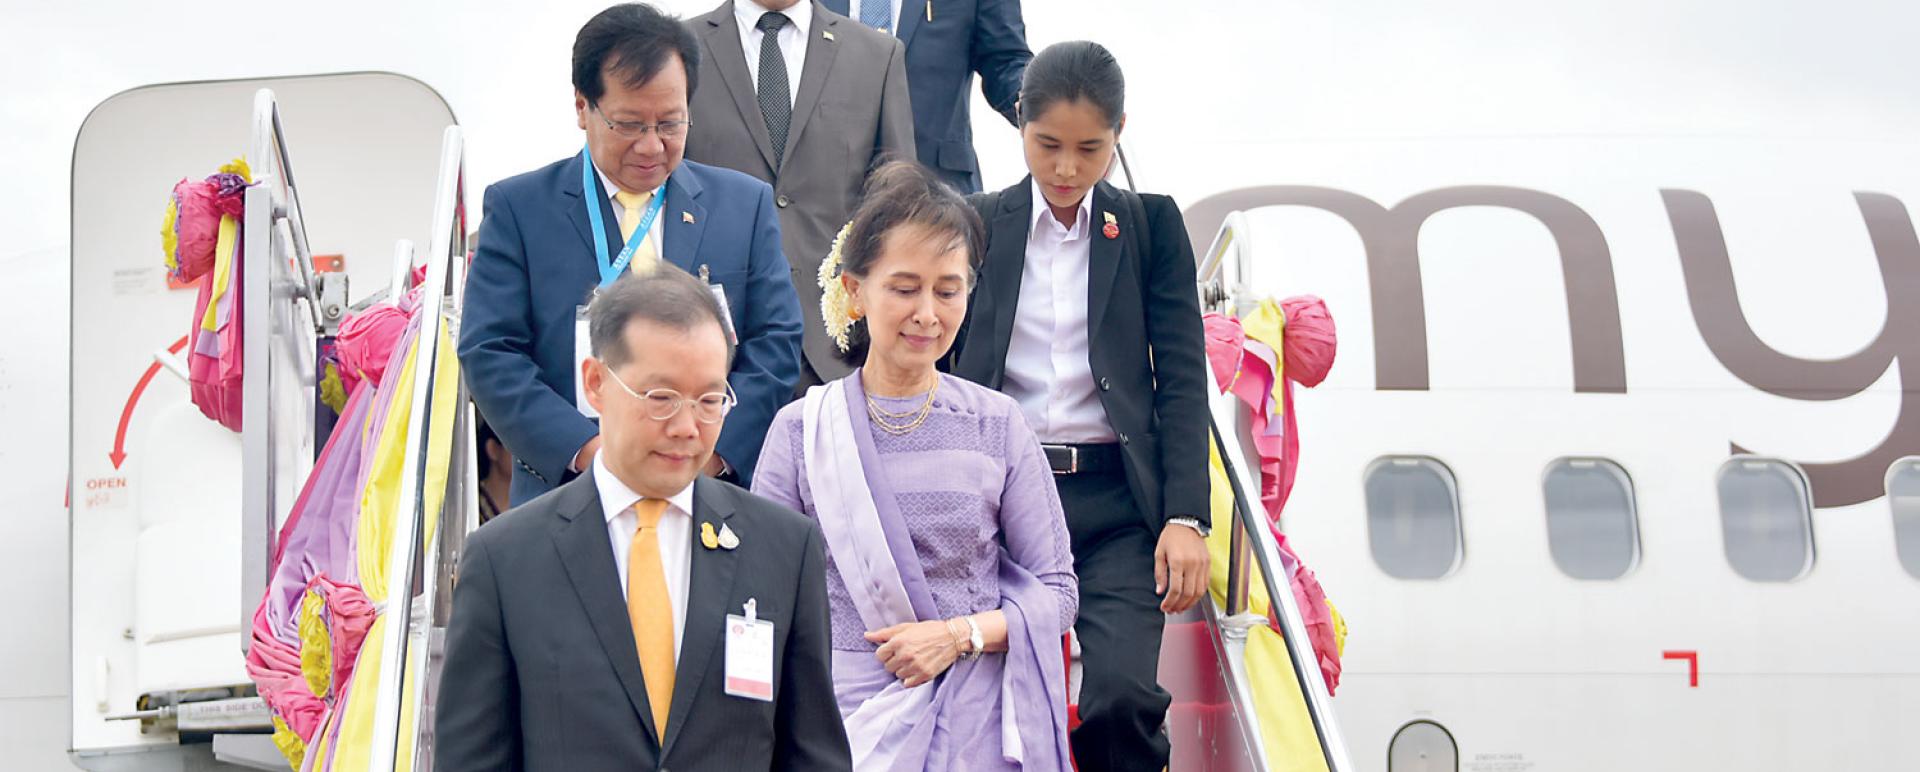 Thai Deputy Prime Minister and Public Health Minister welcomed the State Counsellor who arrived at Bangkok for ASEAN Summit